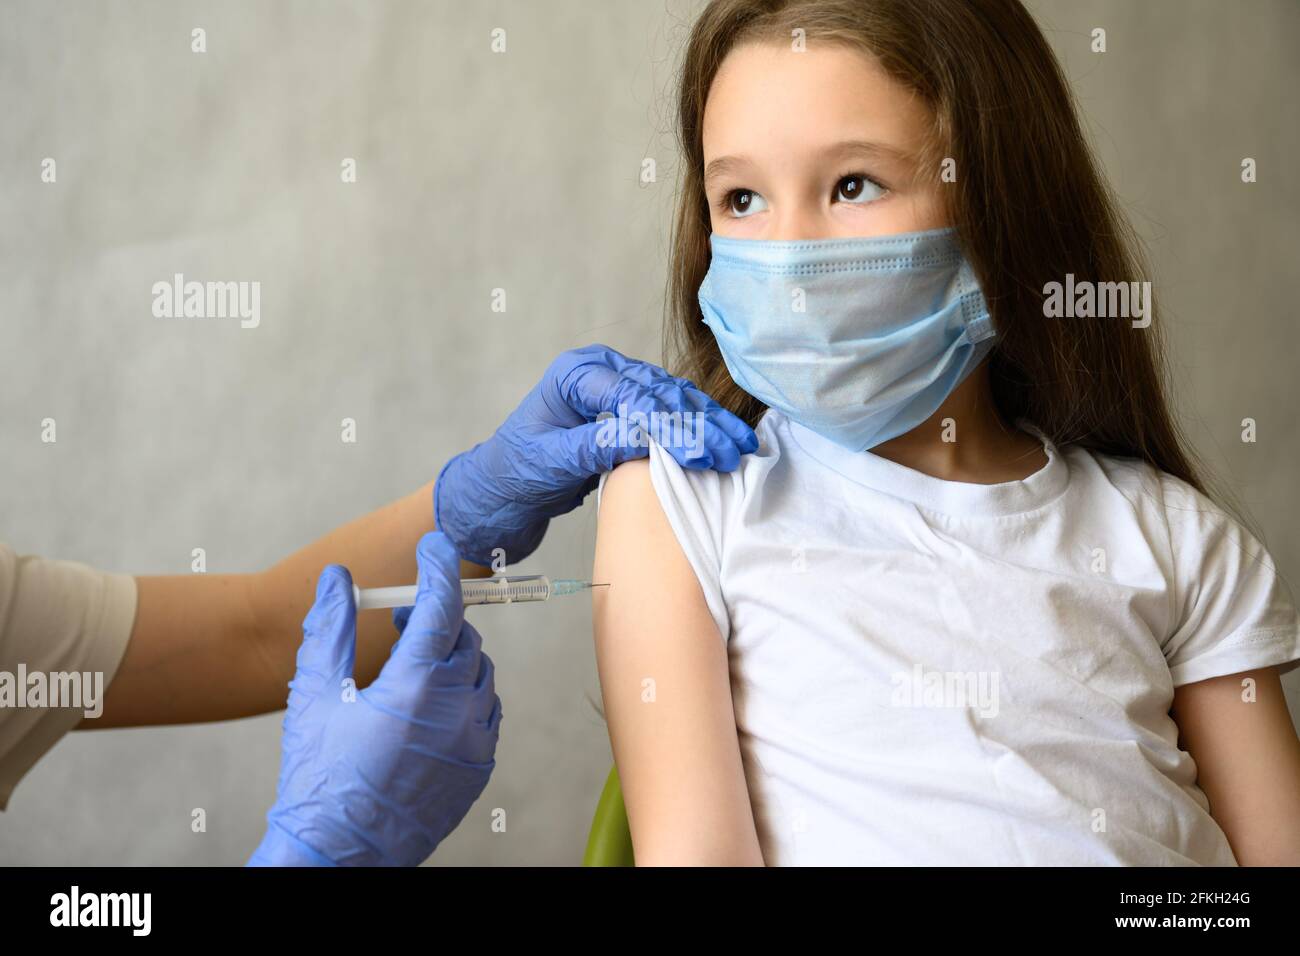 Vaccination of kid from COVID-19 or flu, cute little girl in mask during coronavirus vaccine injection. Doctor vaccinates adorable child. Concept of i Stock Photo